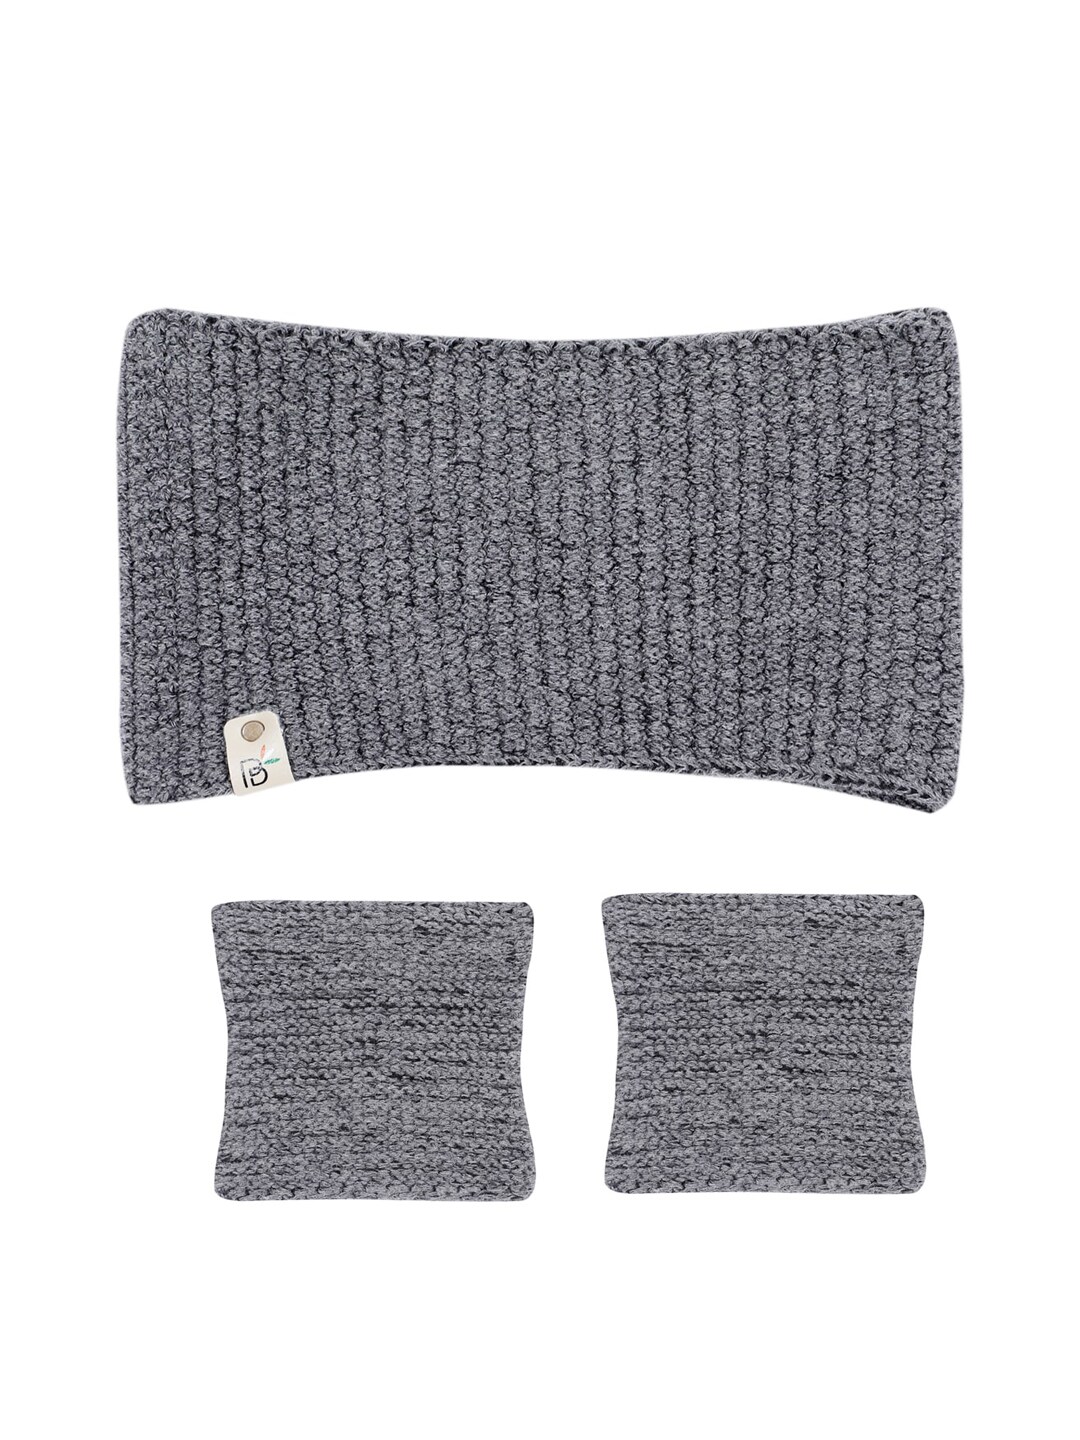 Bharatasya Set Of 3 Grey Knitted Cotton Headband and Wristbands Price in India